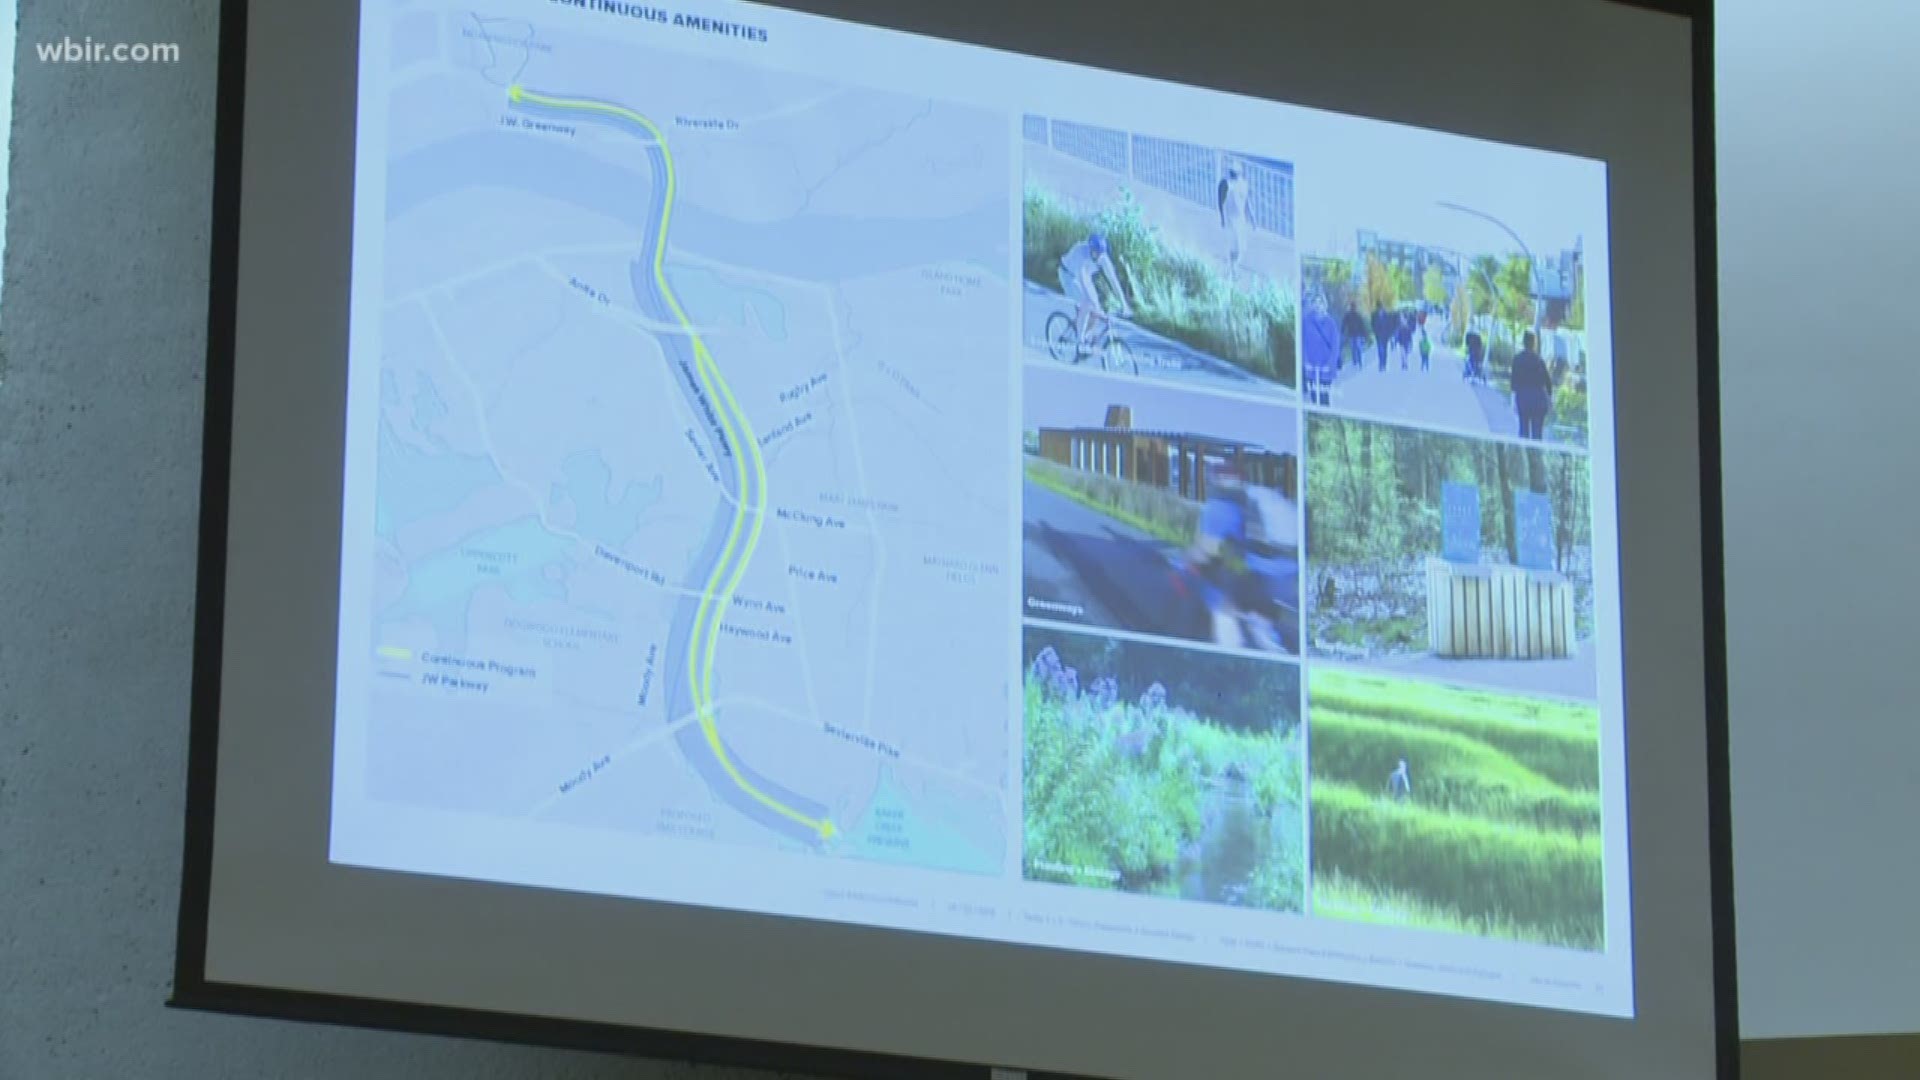 City leaders focused on the progress of the of the Urban Wilderness Gateway park project.